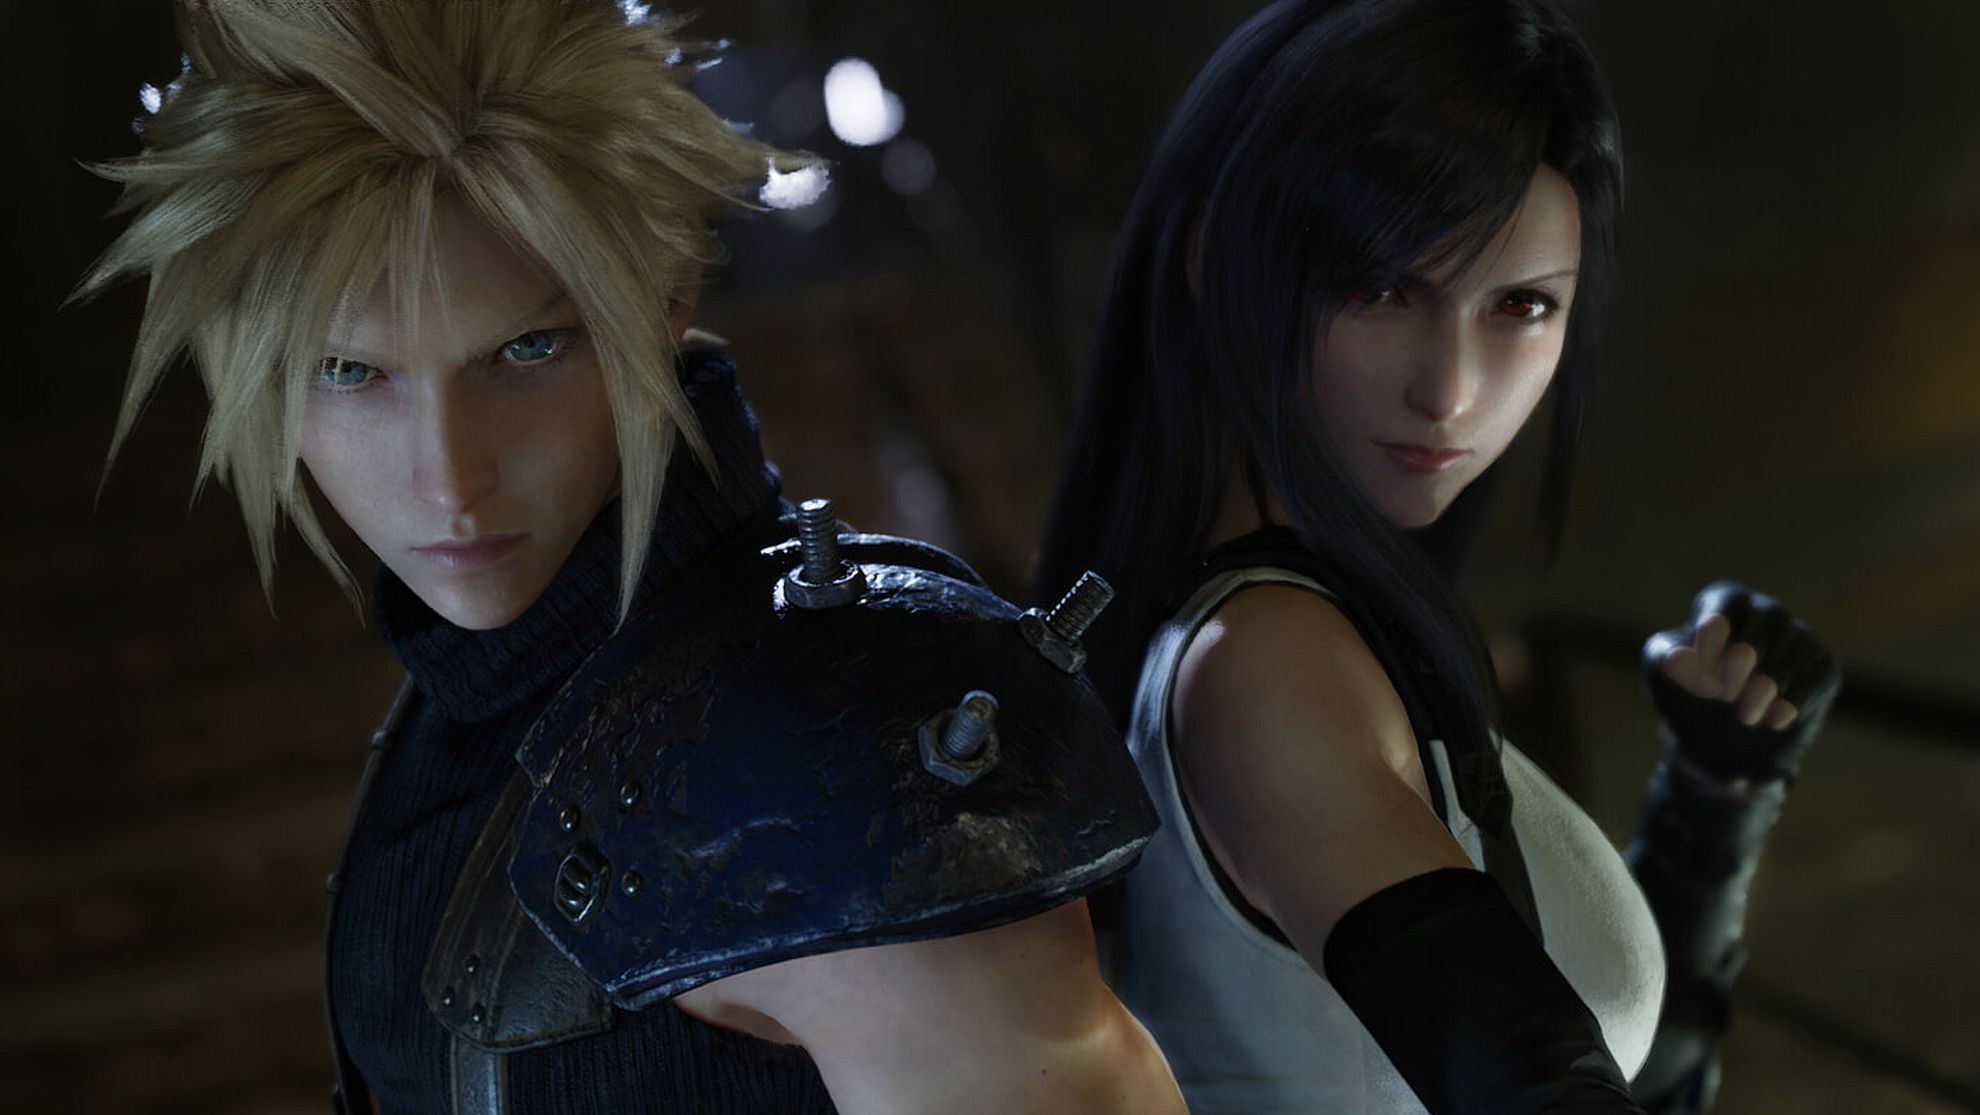 Image for The Final Fantasy 7 25th Anniversary stream is today and you can watch it here